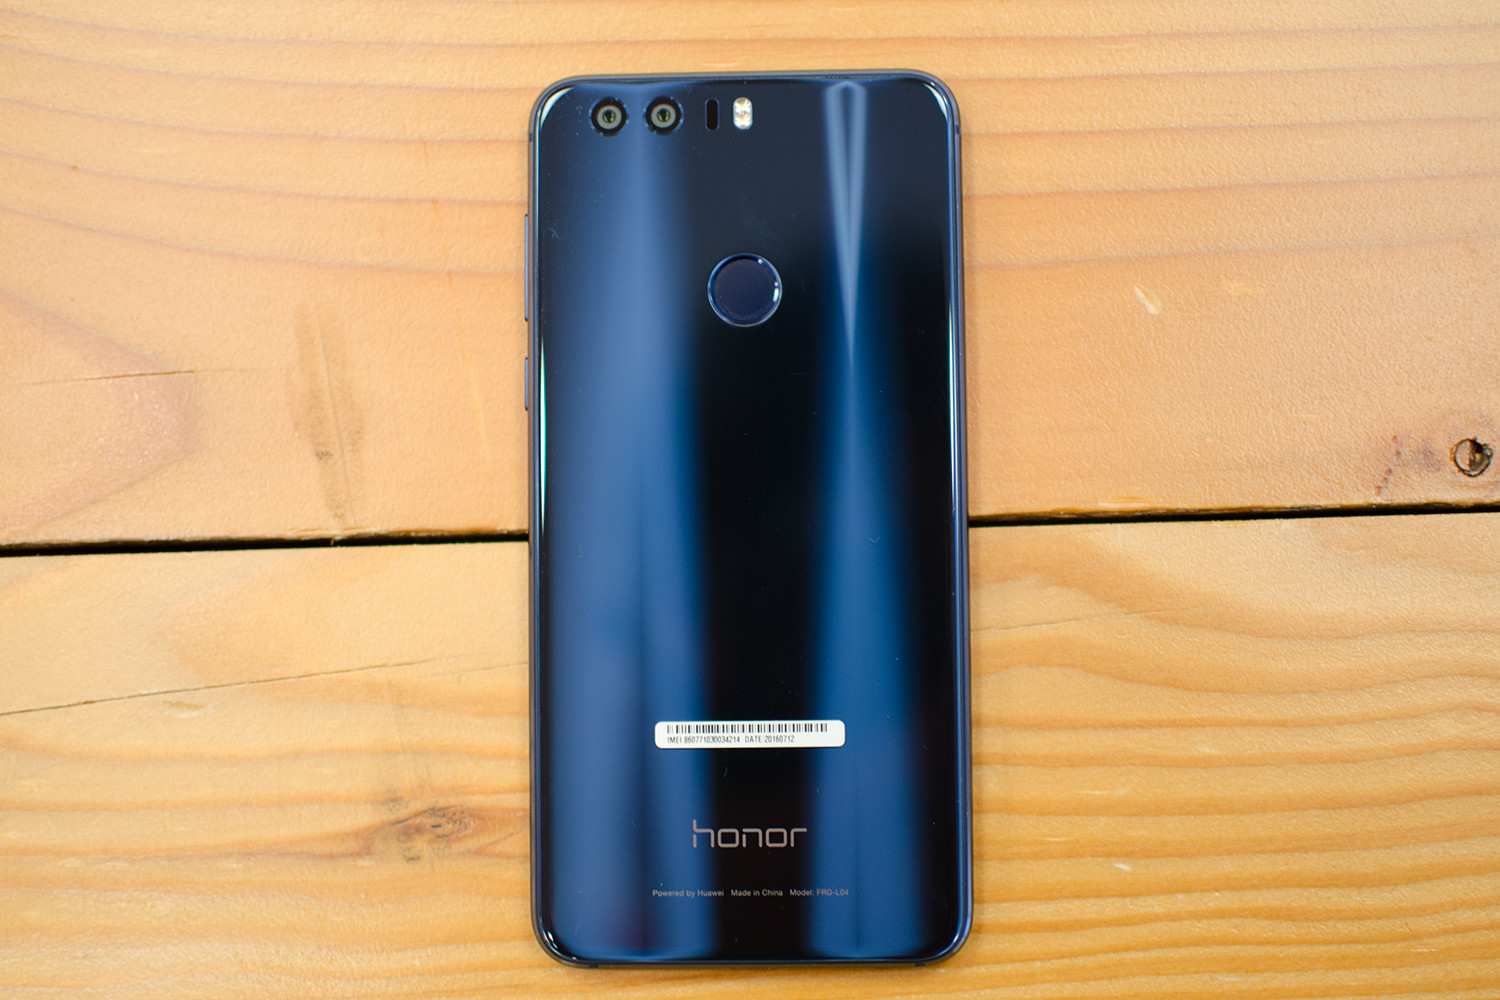 Huawei Honor 8 launch in India scheduled for this October!